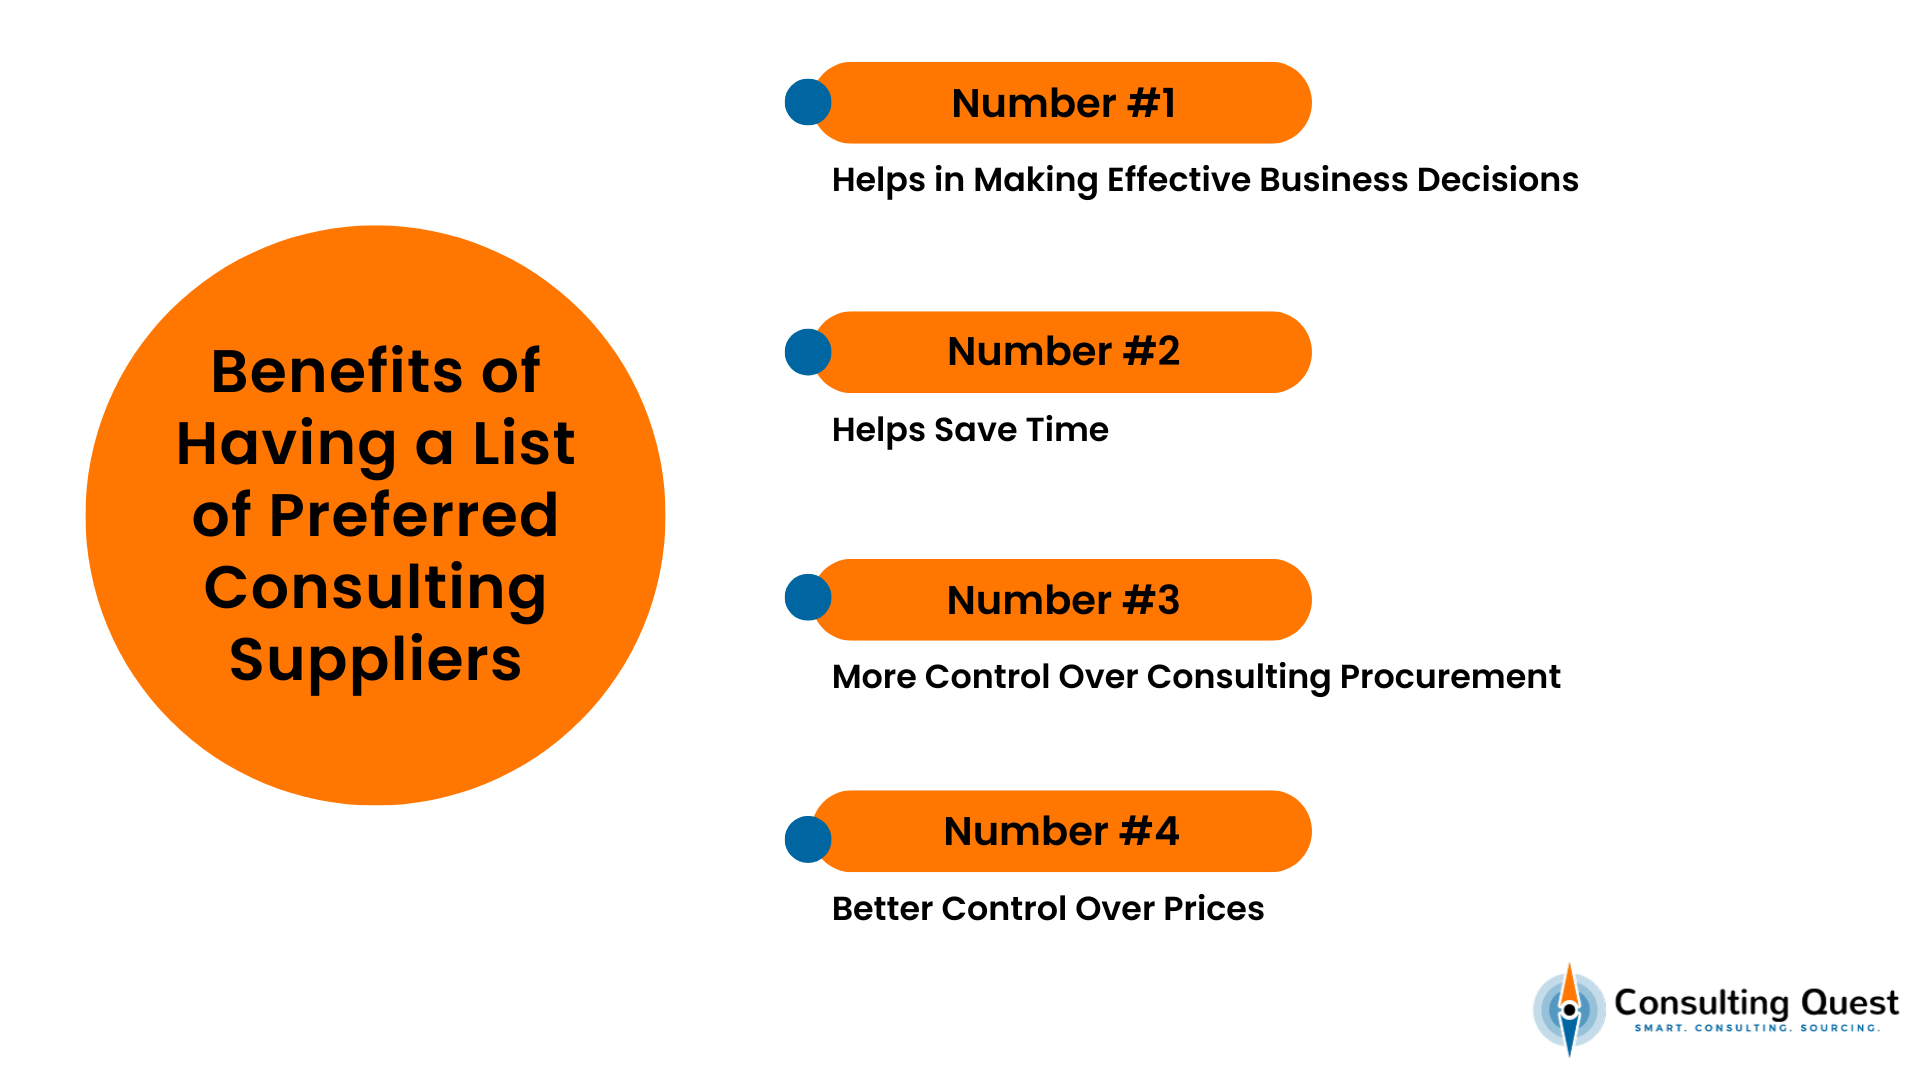 Benefits of Having a List of Preferred Consulting Suppliers